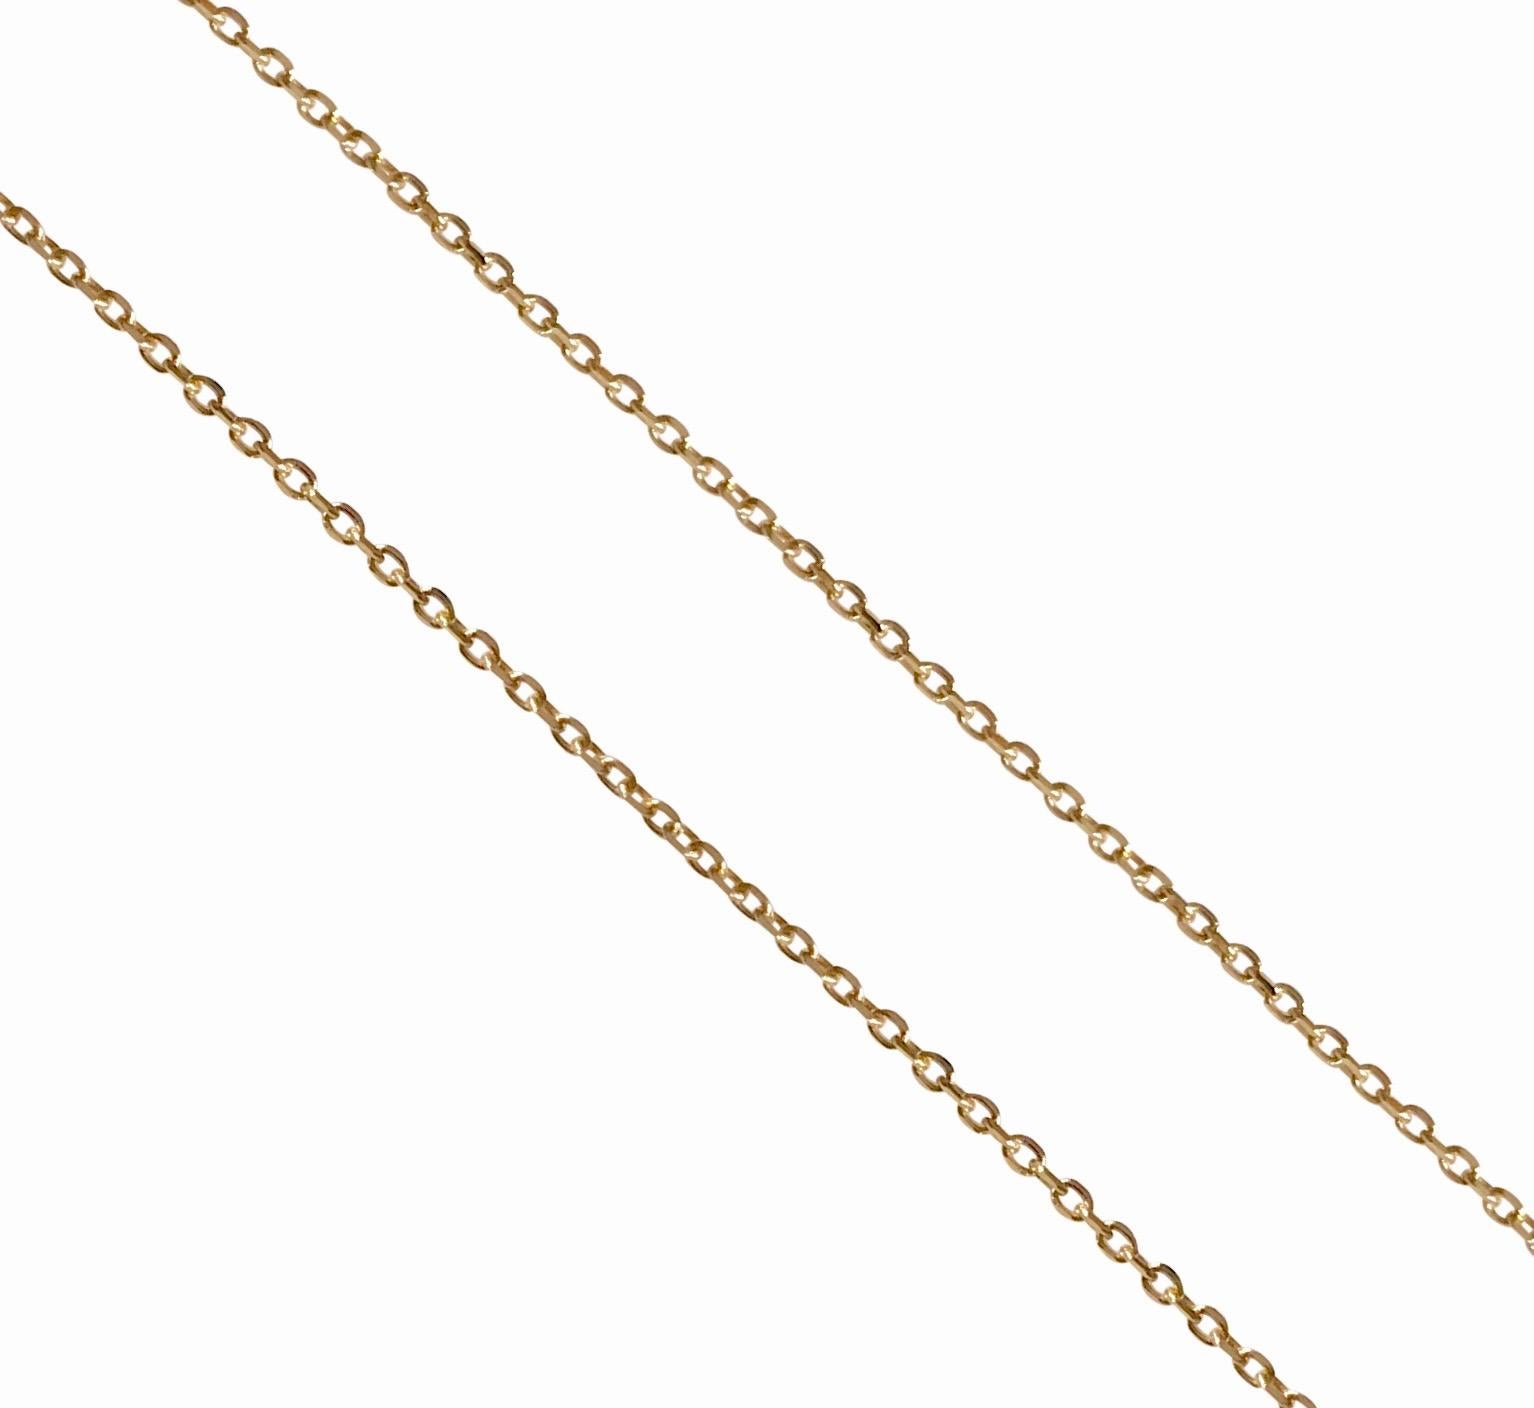 Fine solid 18Karat yellow gold chain.
Ideal to wear with pendants.
Weight: 1.66 g
Length : 43.00 cm 
Gauge:  0.7 mm
Hallmark: London’s Goldsmiths’ Company –  Assay Office 

You will receive your jewellery in a pouch and a box embossed with our logo.